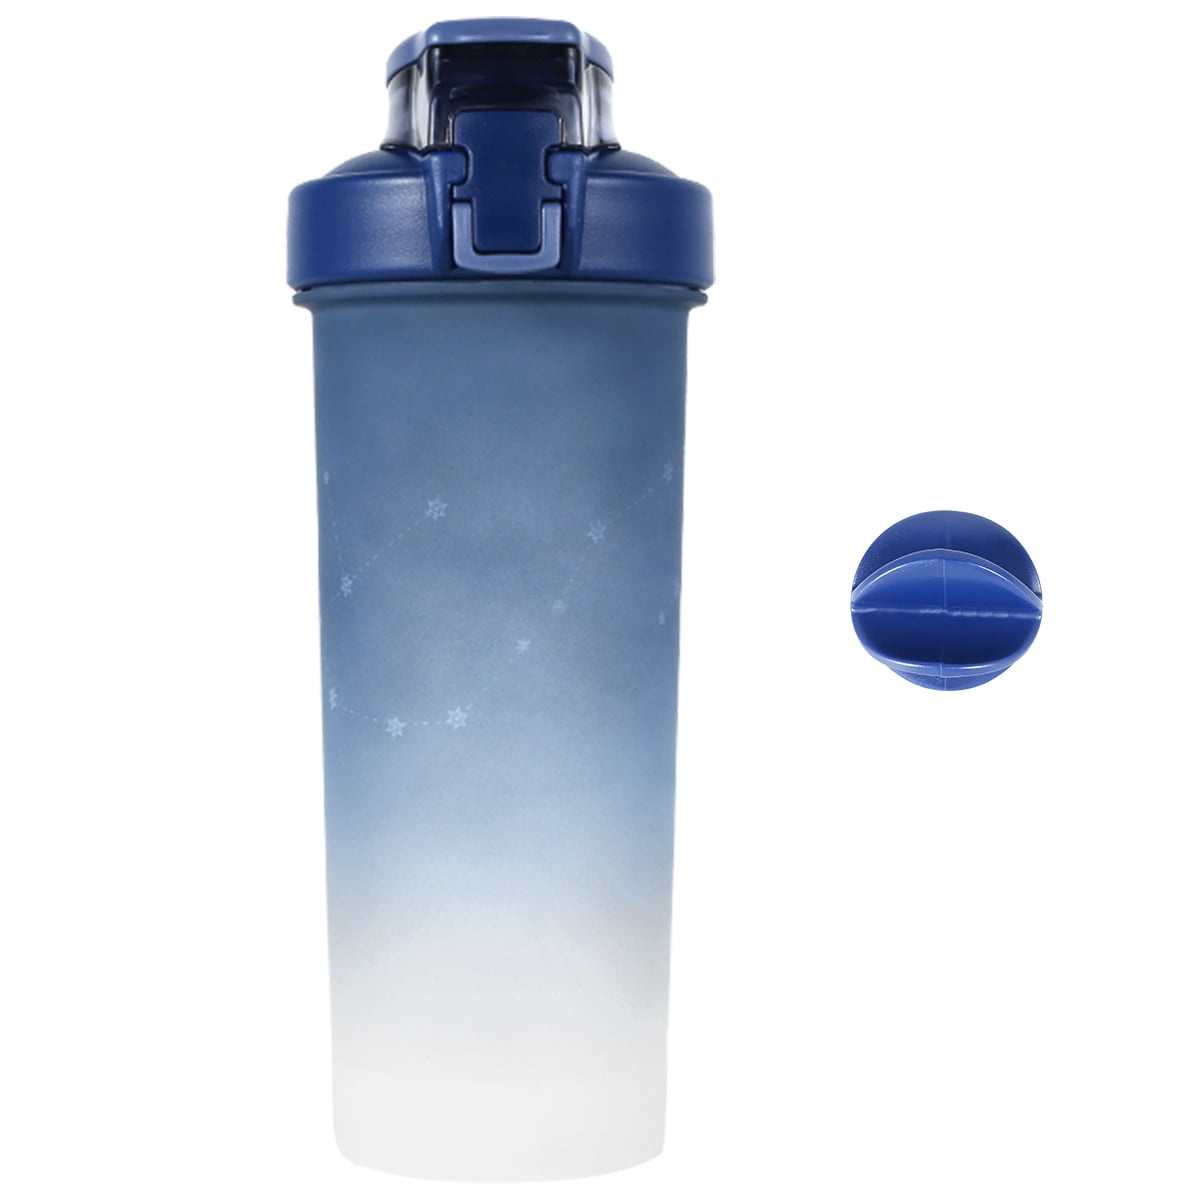 Pcapzz 800ml Shaker Bottle,Plastic and Silicone Shaker Cup with